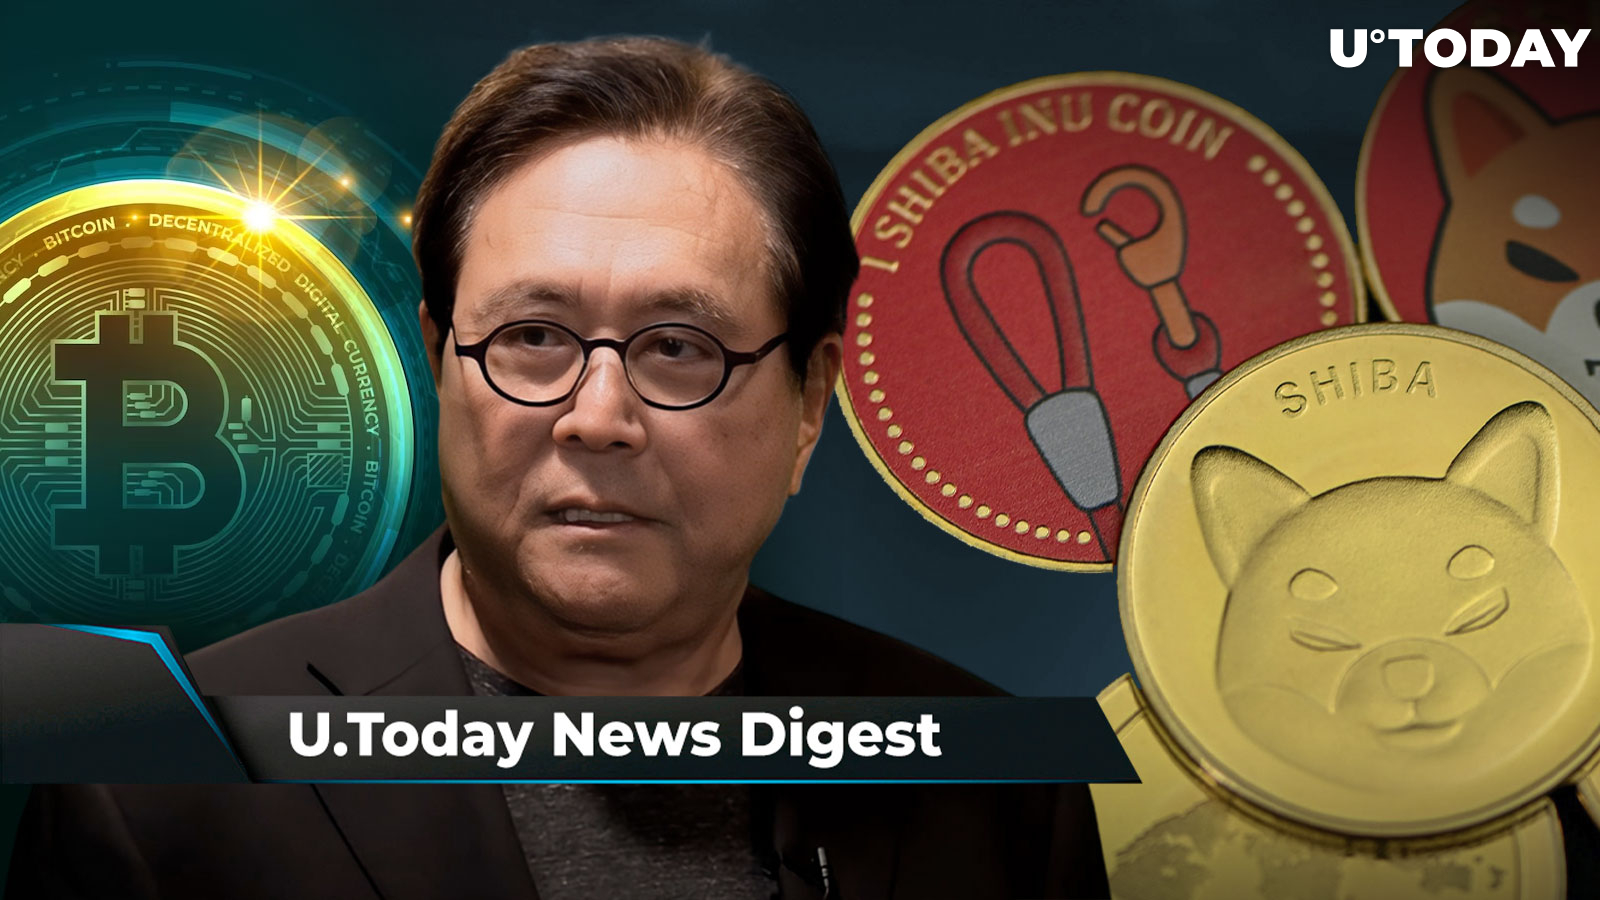 Shibarium’s Fast Launch Slowed Down by This, LEASH Gets New Listing, Robert Kiyosaki Believes BTC Best for Unstable Times: Crypto News Digest by U.Today